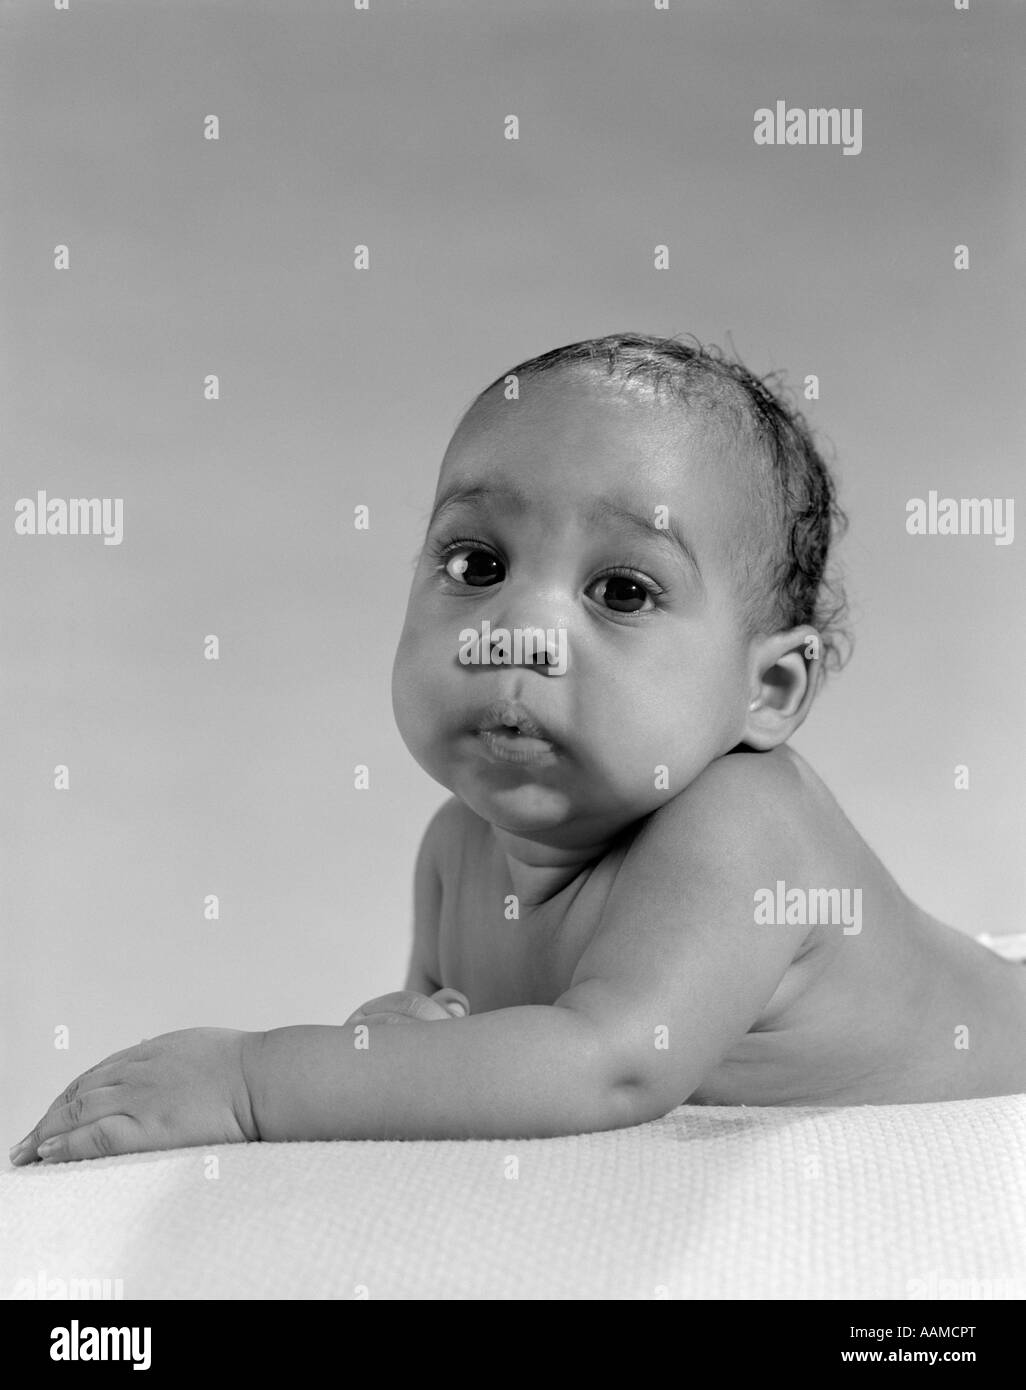 1960s PORTRAIT CHUBBY CUTE AFRICAN AMERICAN BABY LYING ON STOMACH ARMS OUT IN FRONT LOOKING AT CAMERA Stock Photo